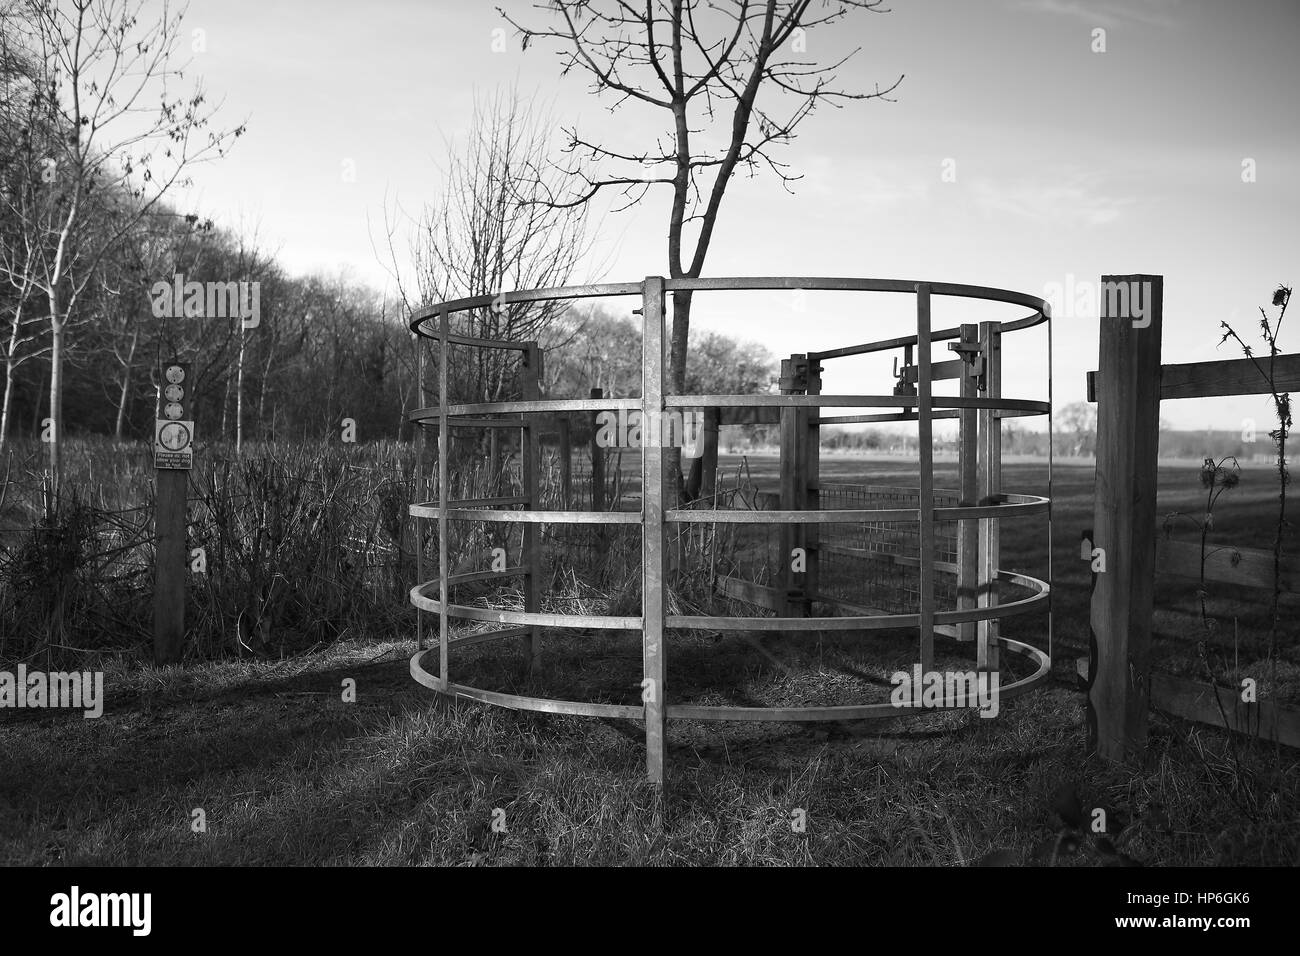 Modern Kissing gate in Lincolnshire near woodland and nature trail Stock Photo